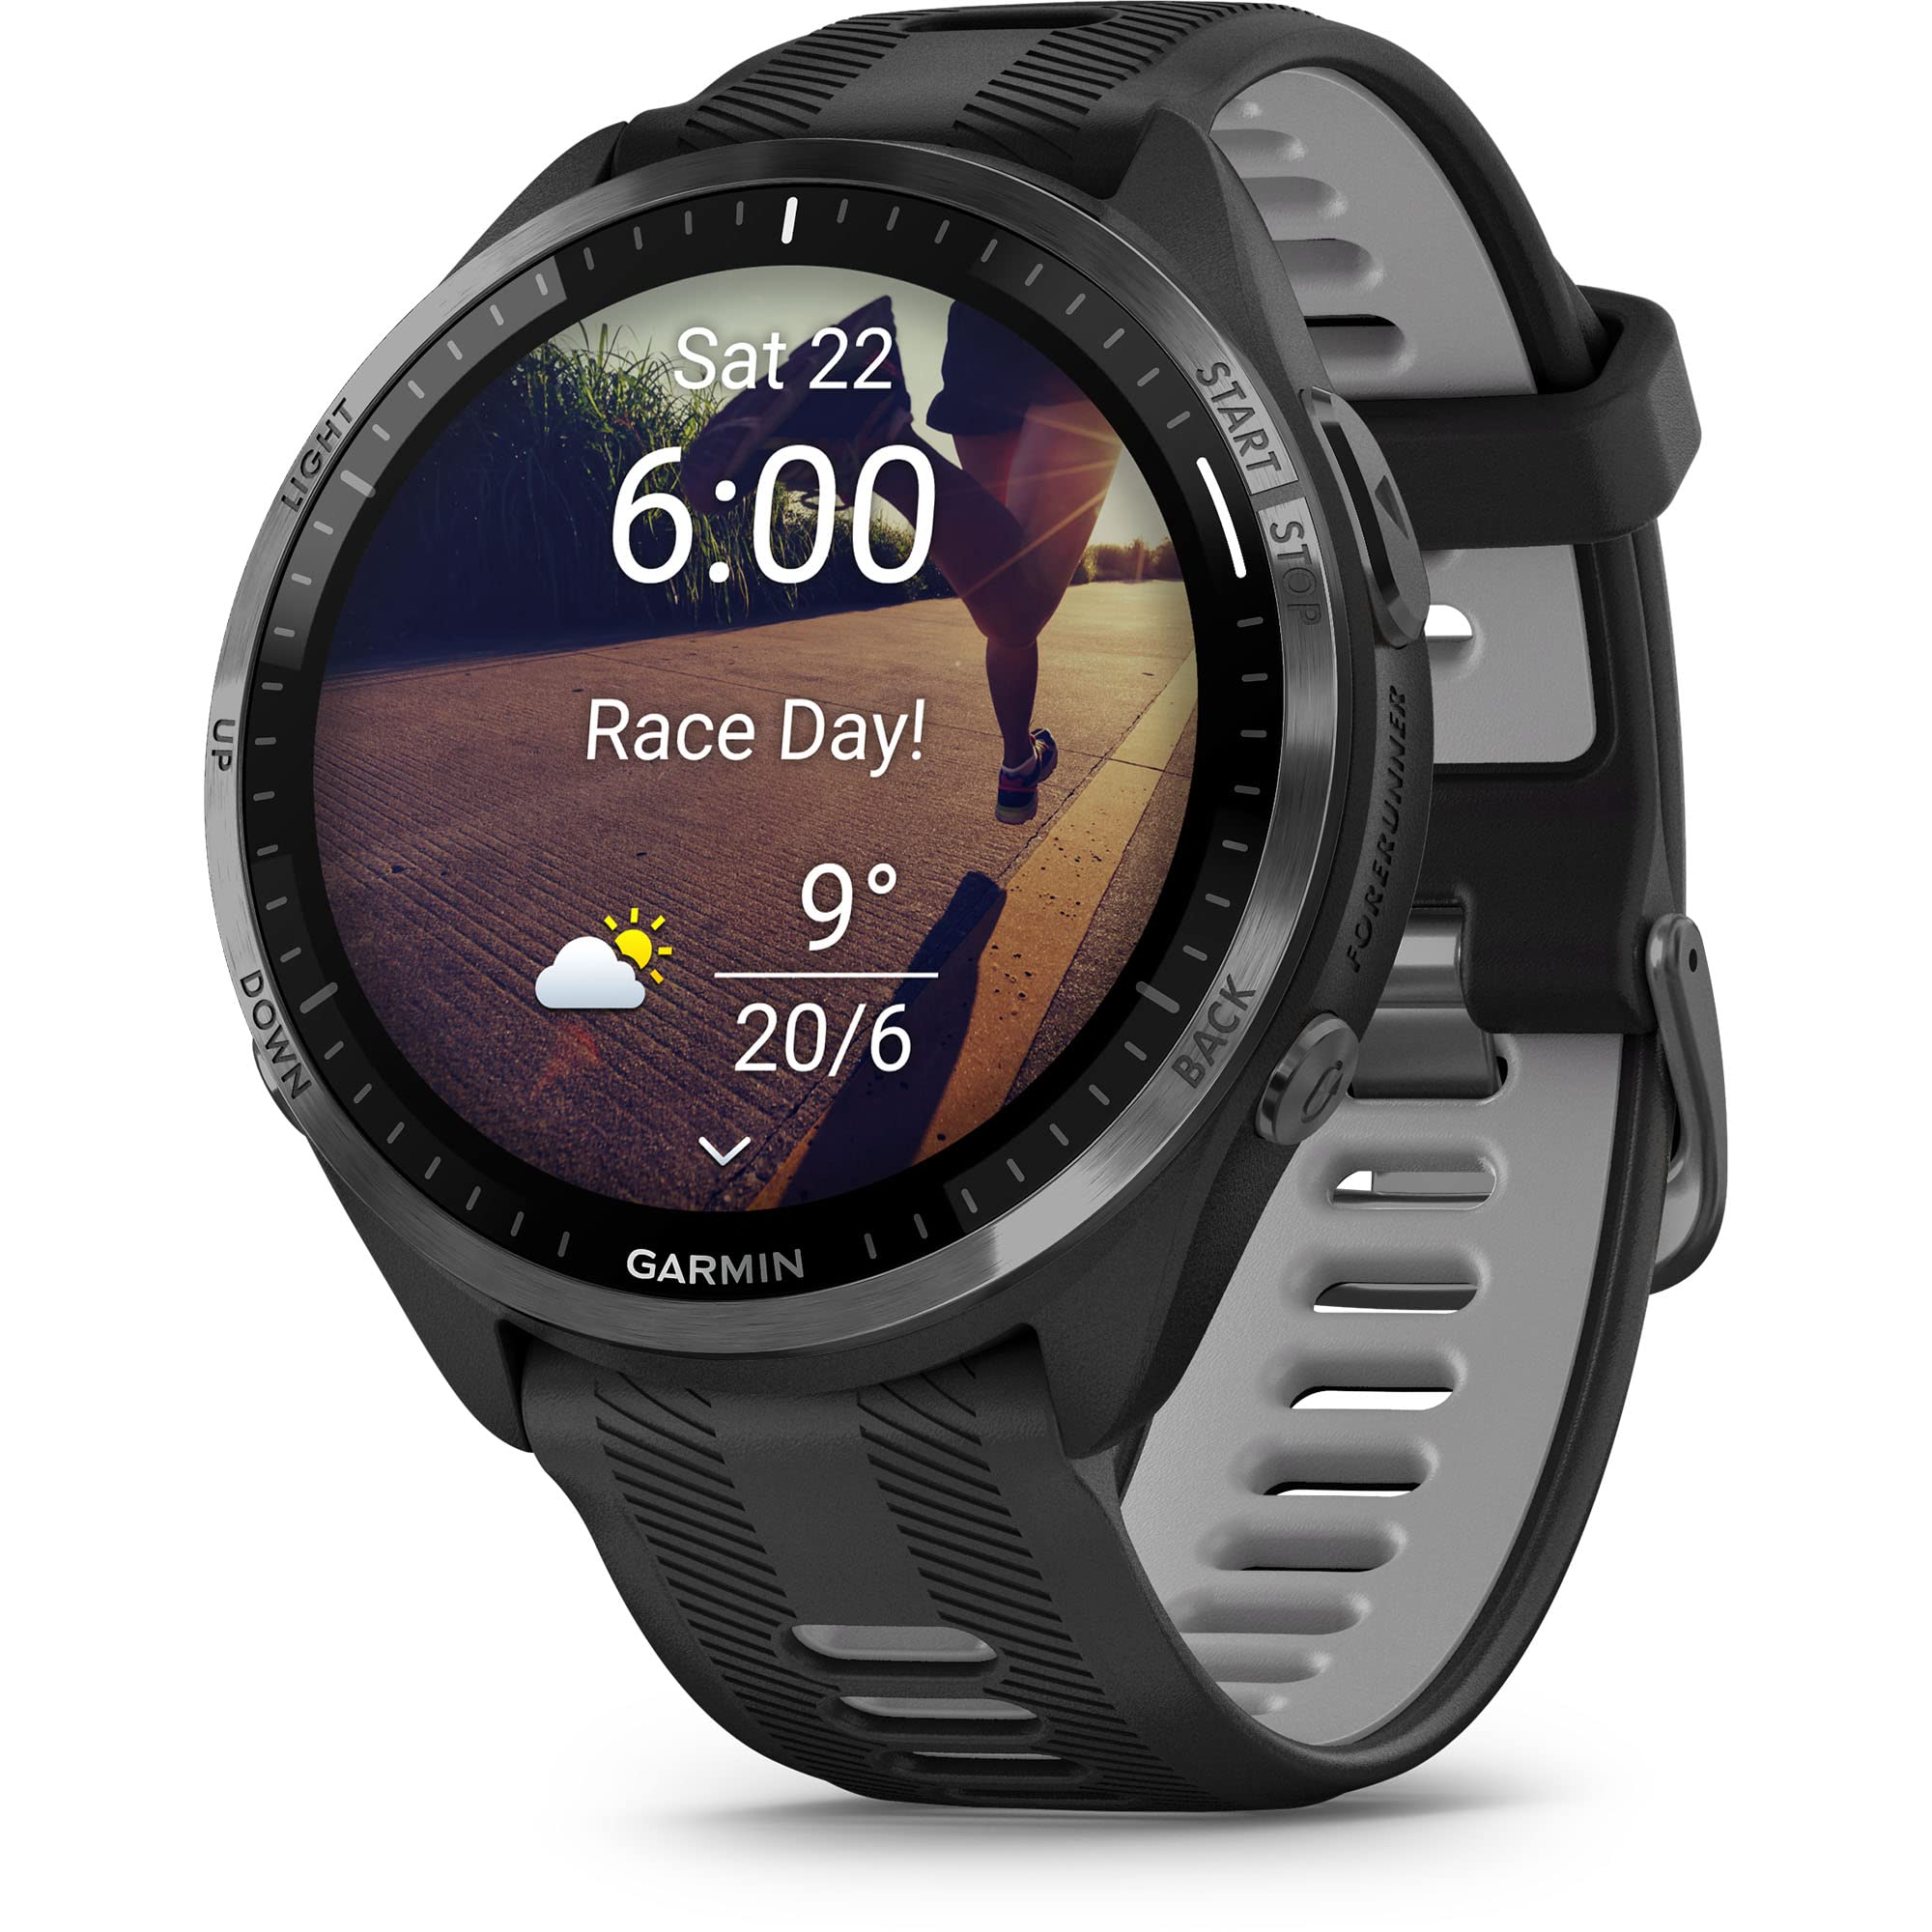 Garmin Forerunner® 965 Running Smartwatch, Colorful AMOLED Display, Training Metrics and Recovery Insights, Black and Powder Gray - image 2 of 5